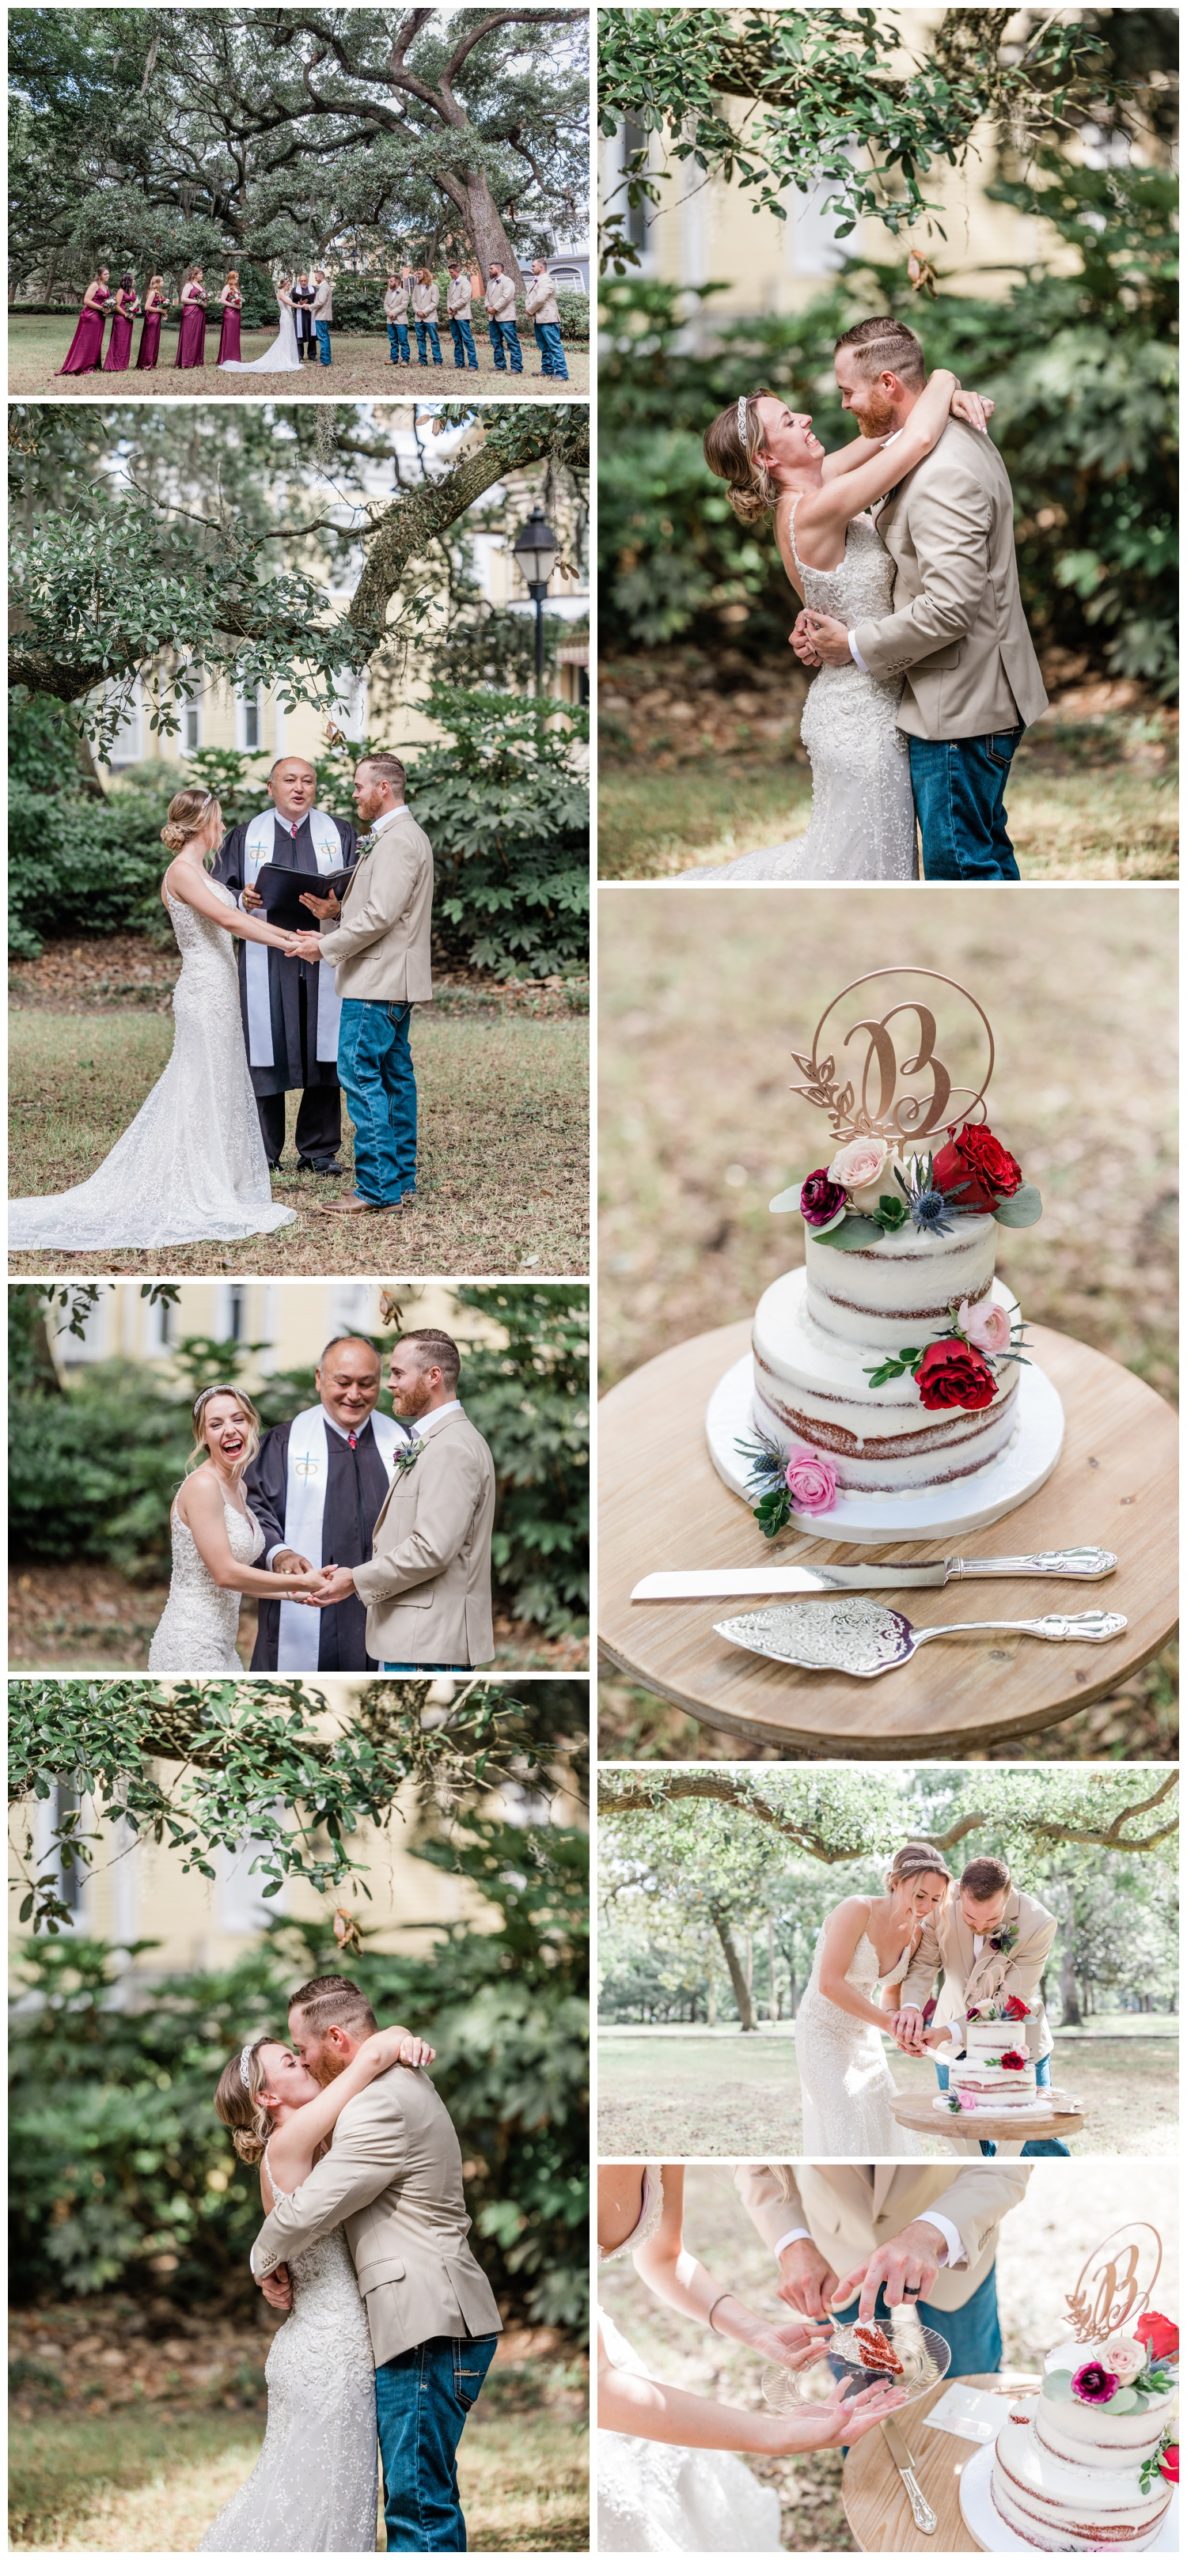 Elope at Forsyth Park - officiating by reverend joe - cake by wicked cakes of savannah - apt b photography